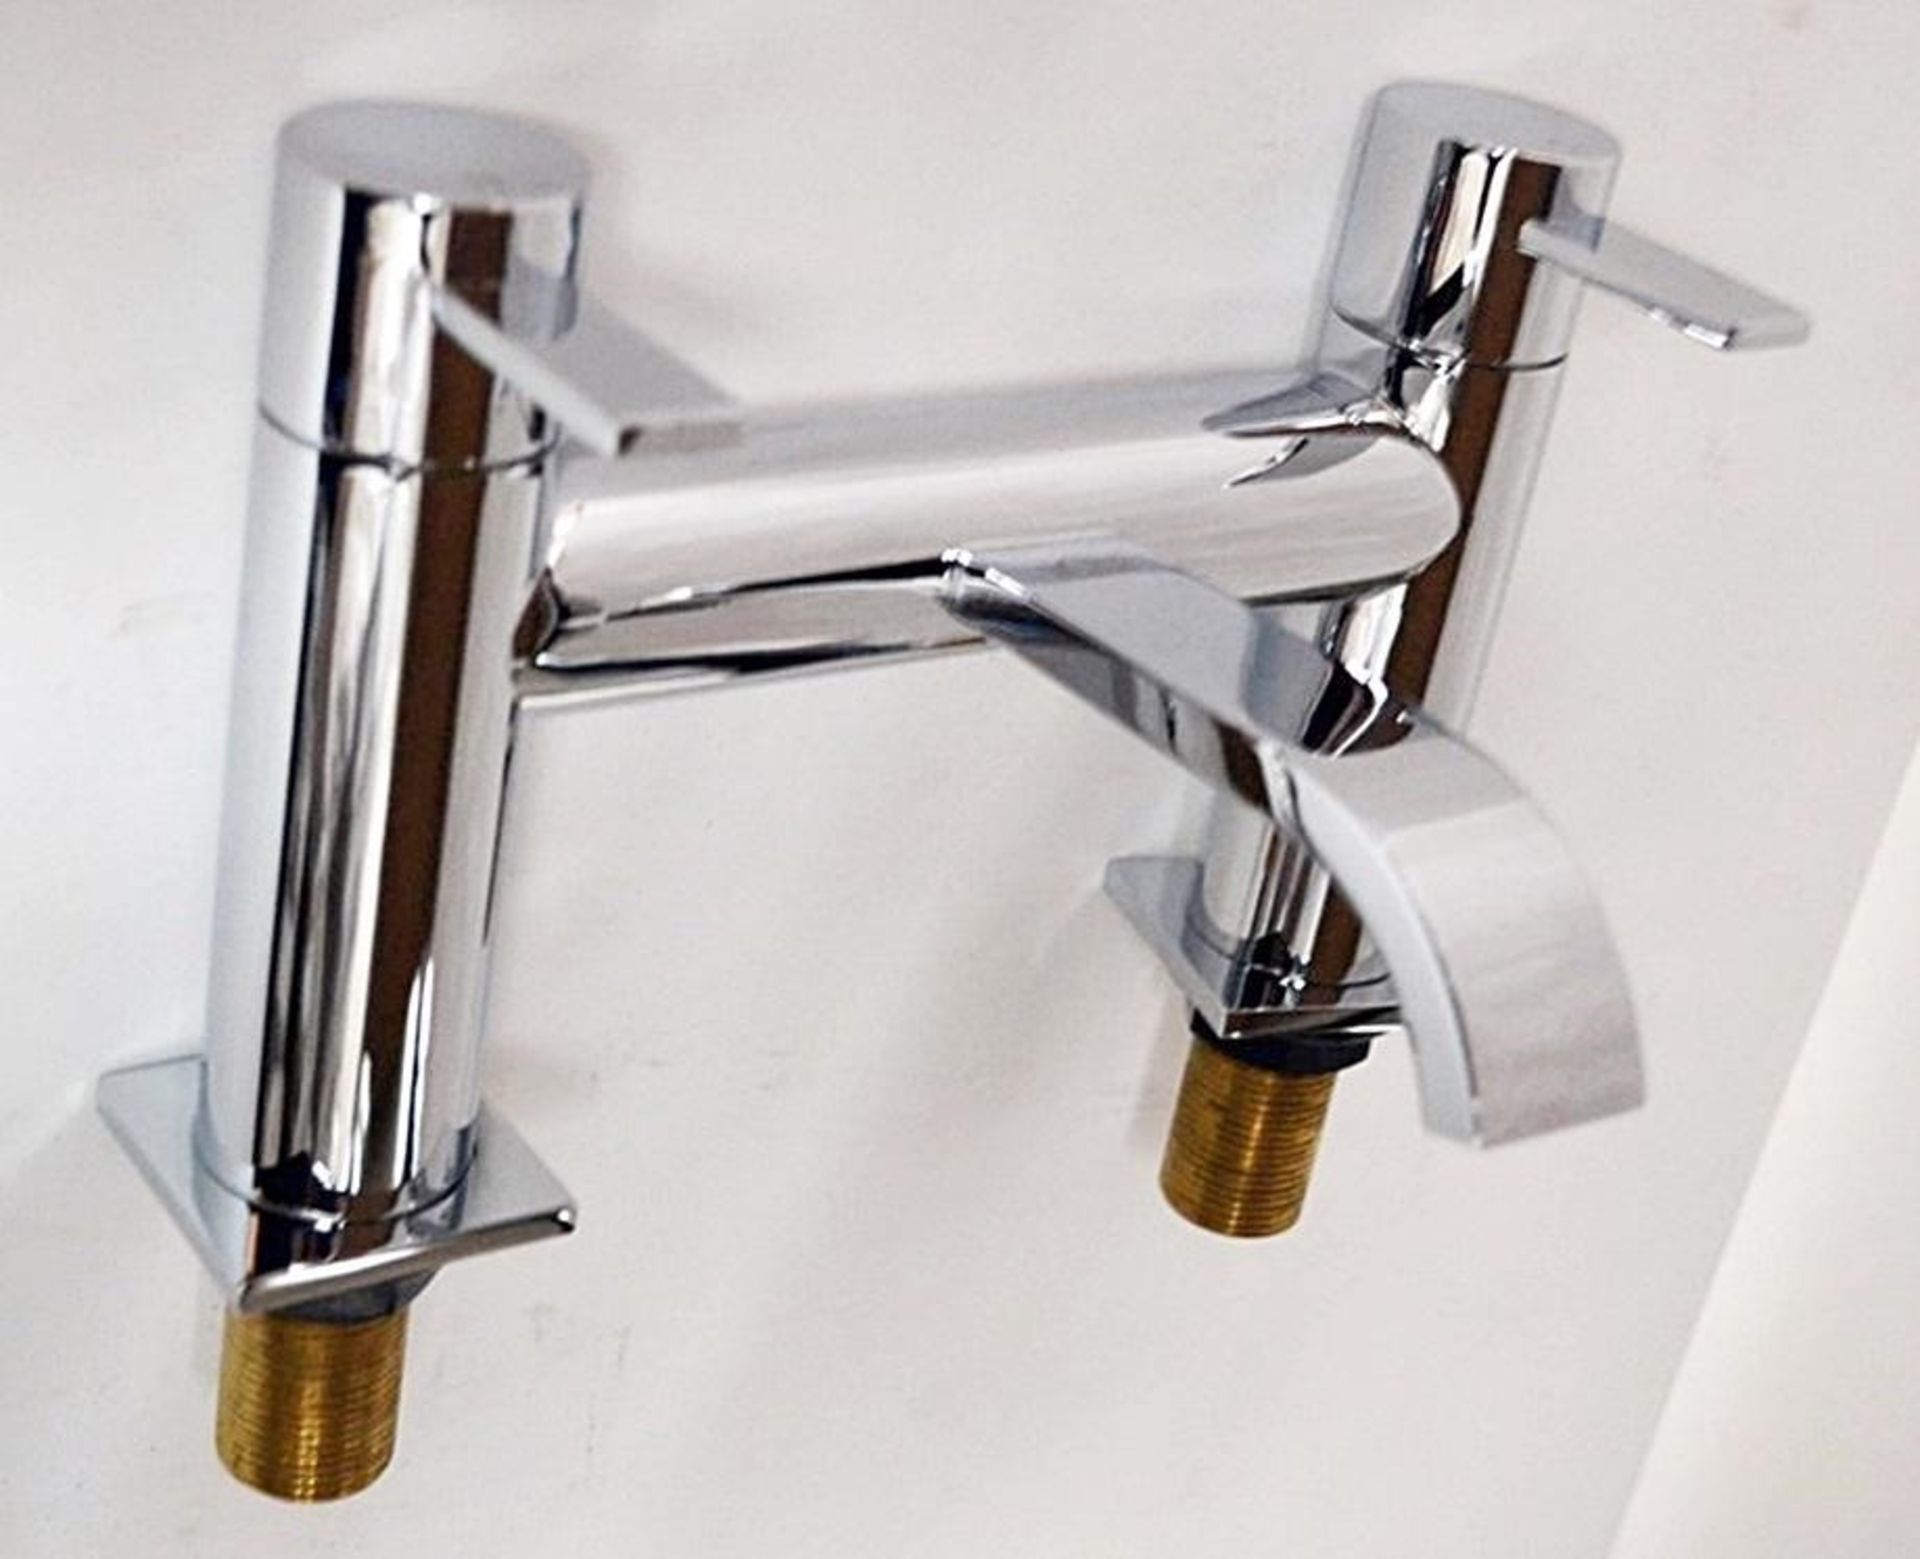 1 x Vogue Series 2 Bath Filler Taps in Chrome - Approx RRP £275! - Image 2 of 7